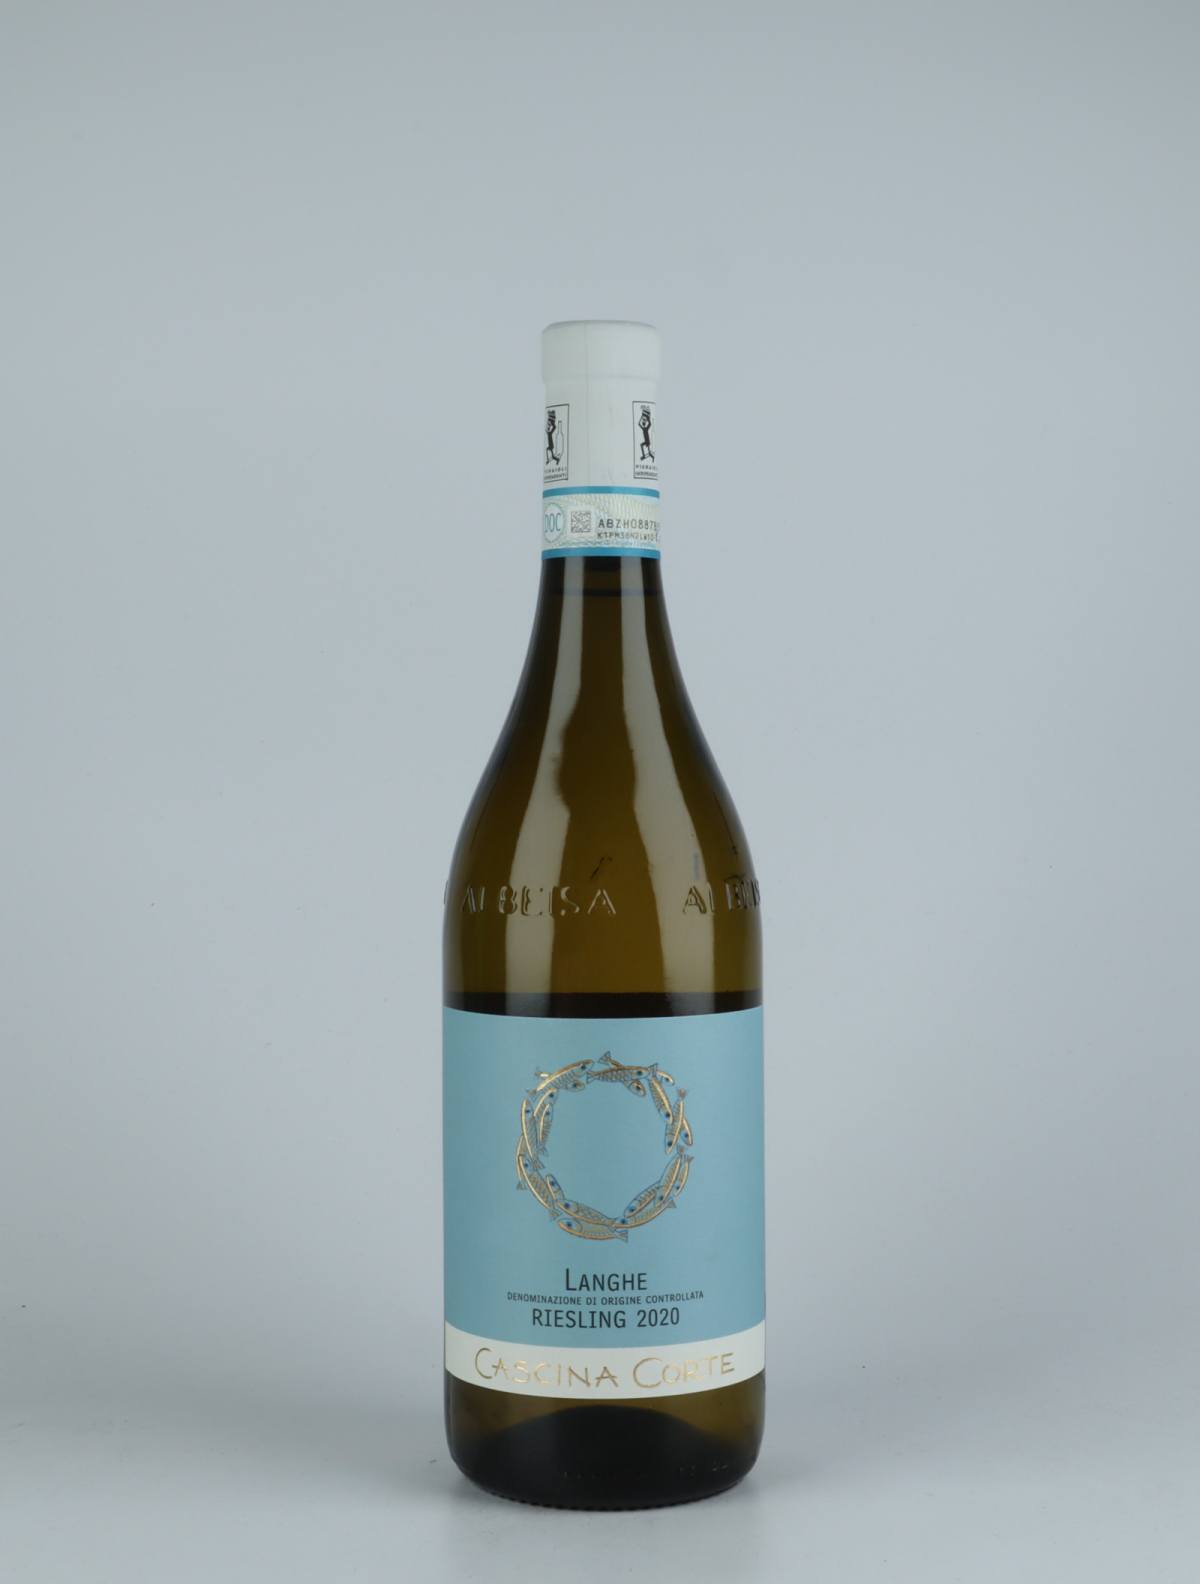 A bottle 2020 Langhe Riesling White wine from Cascina Corte, Piedmont in Italy